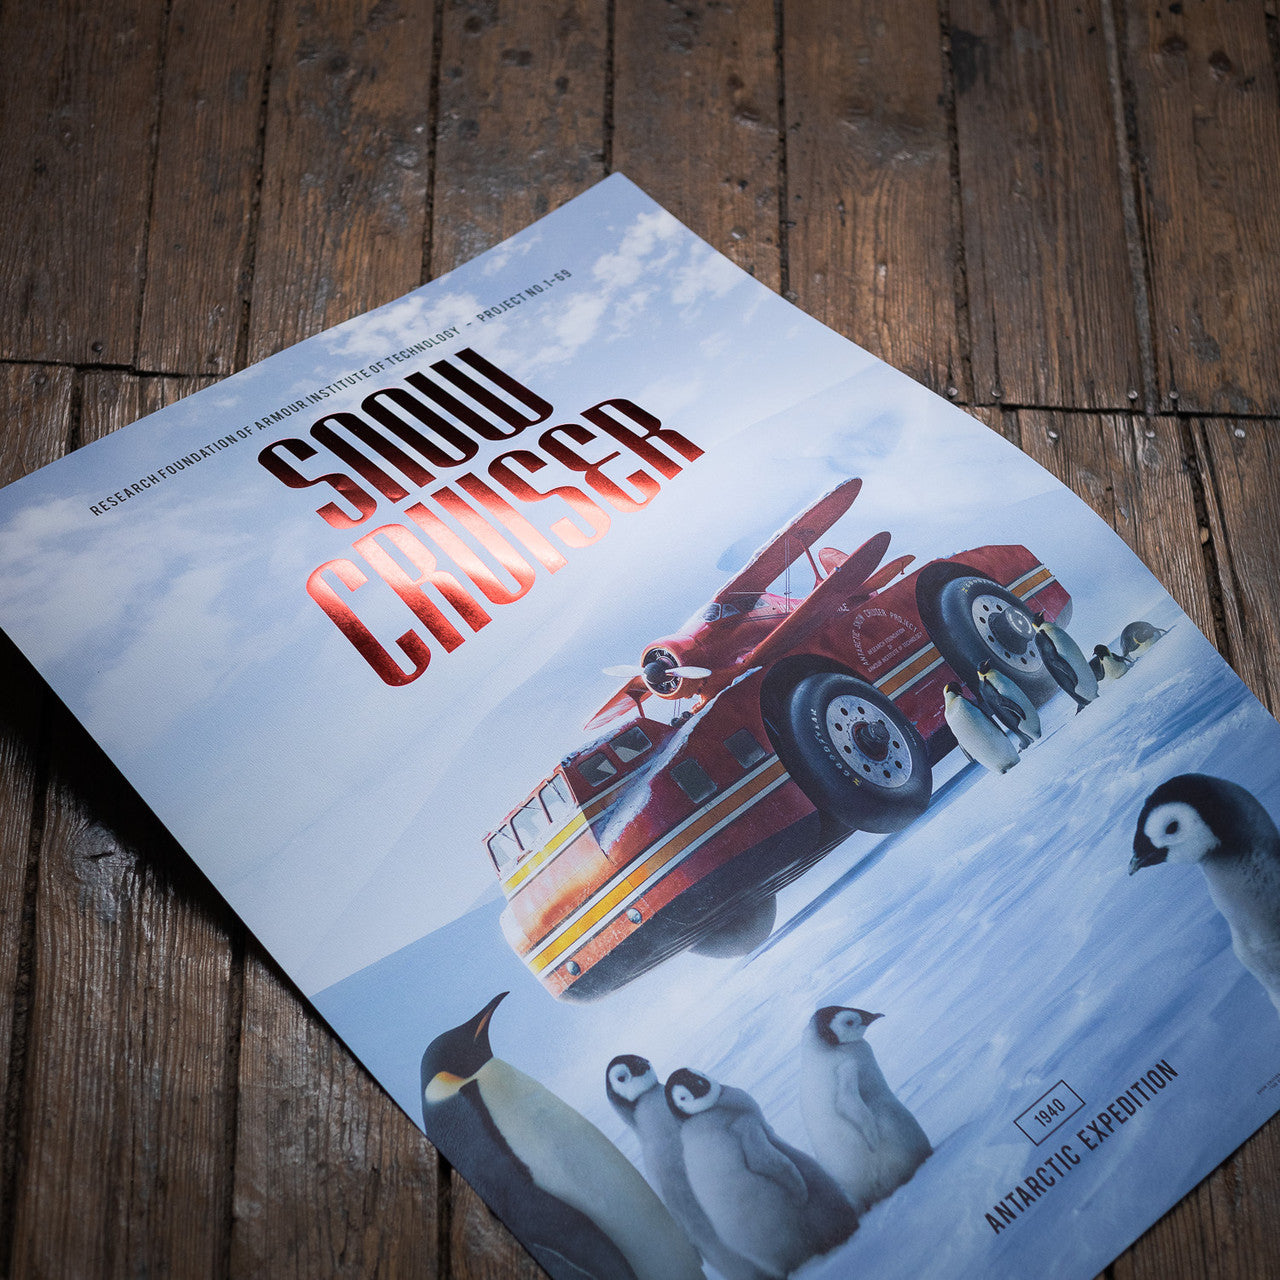 Antarctic Expedition 1940 - Snow Cruiser ‘The Penguin’ | Collector’s Edition